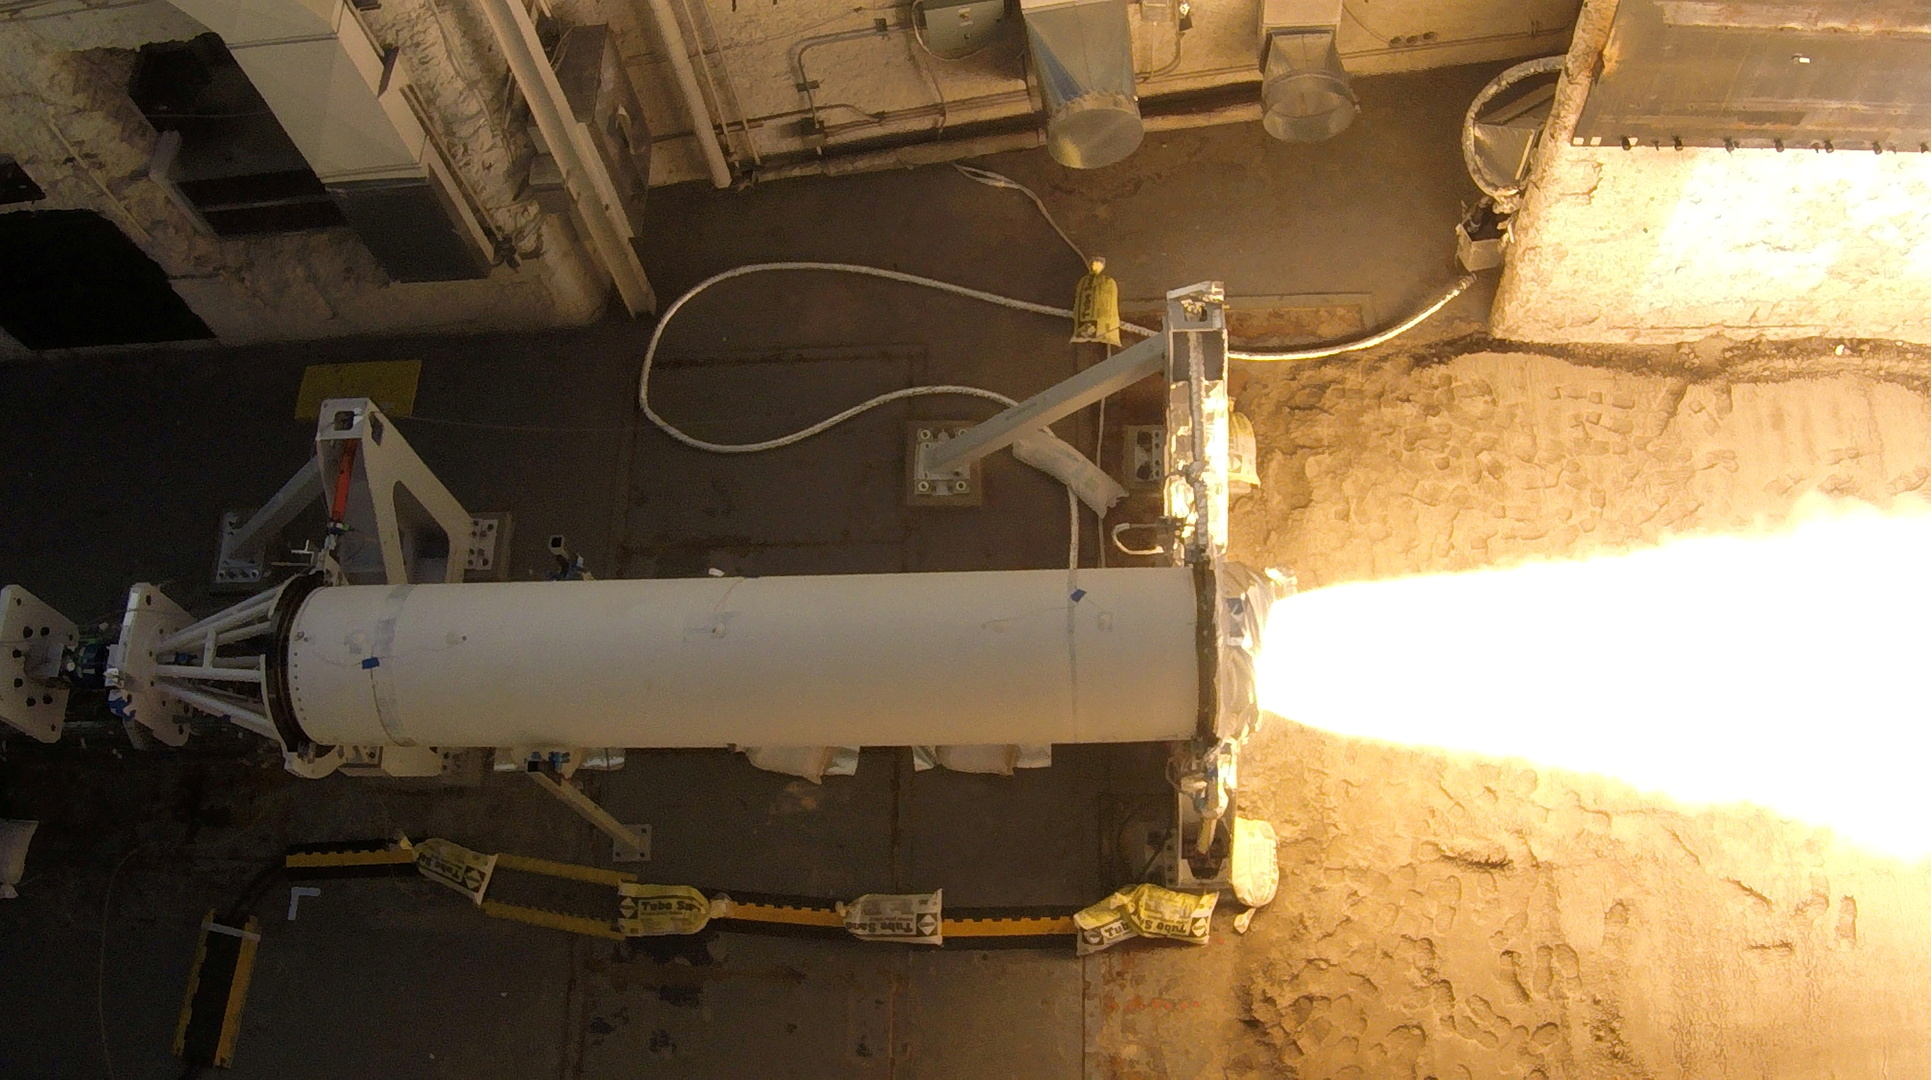 The US Navy, in collaboration with the US Army, conducts a static fire test of the first stage of the newly developed 34.5